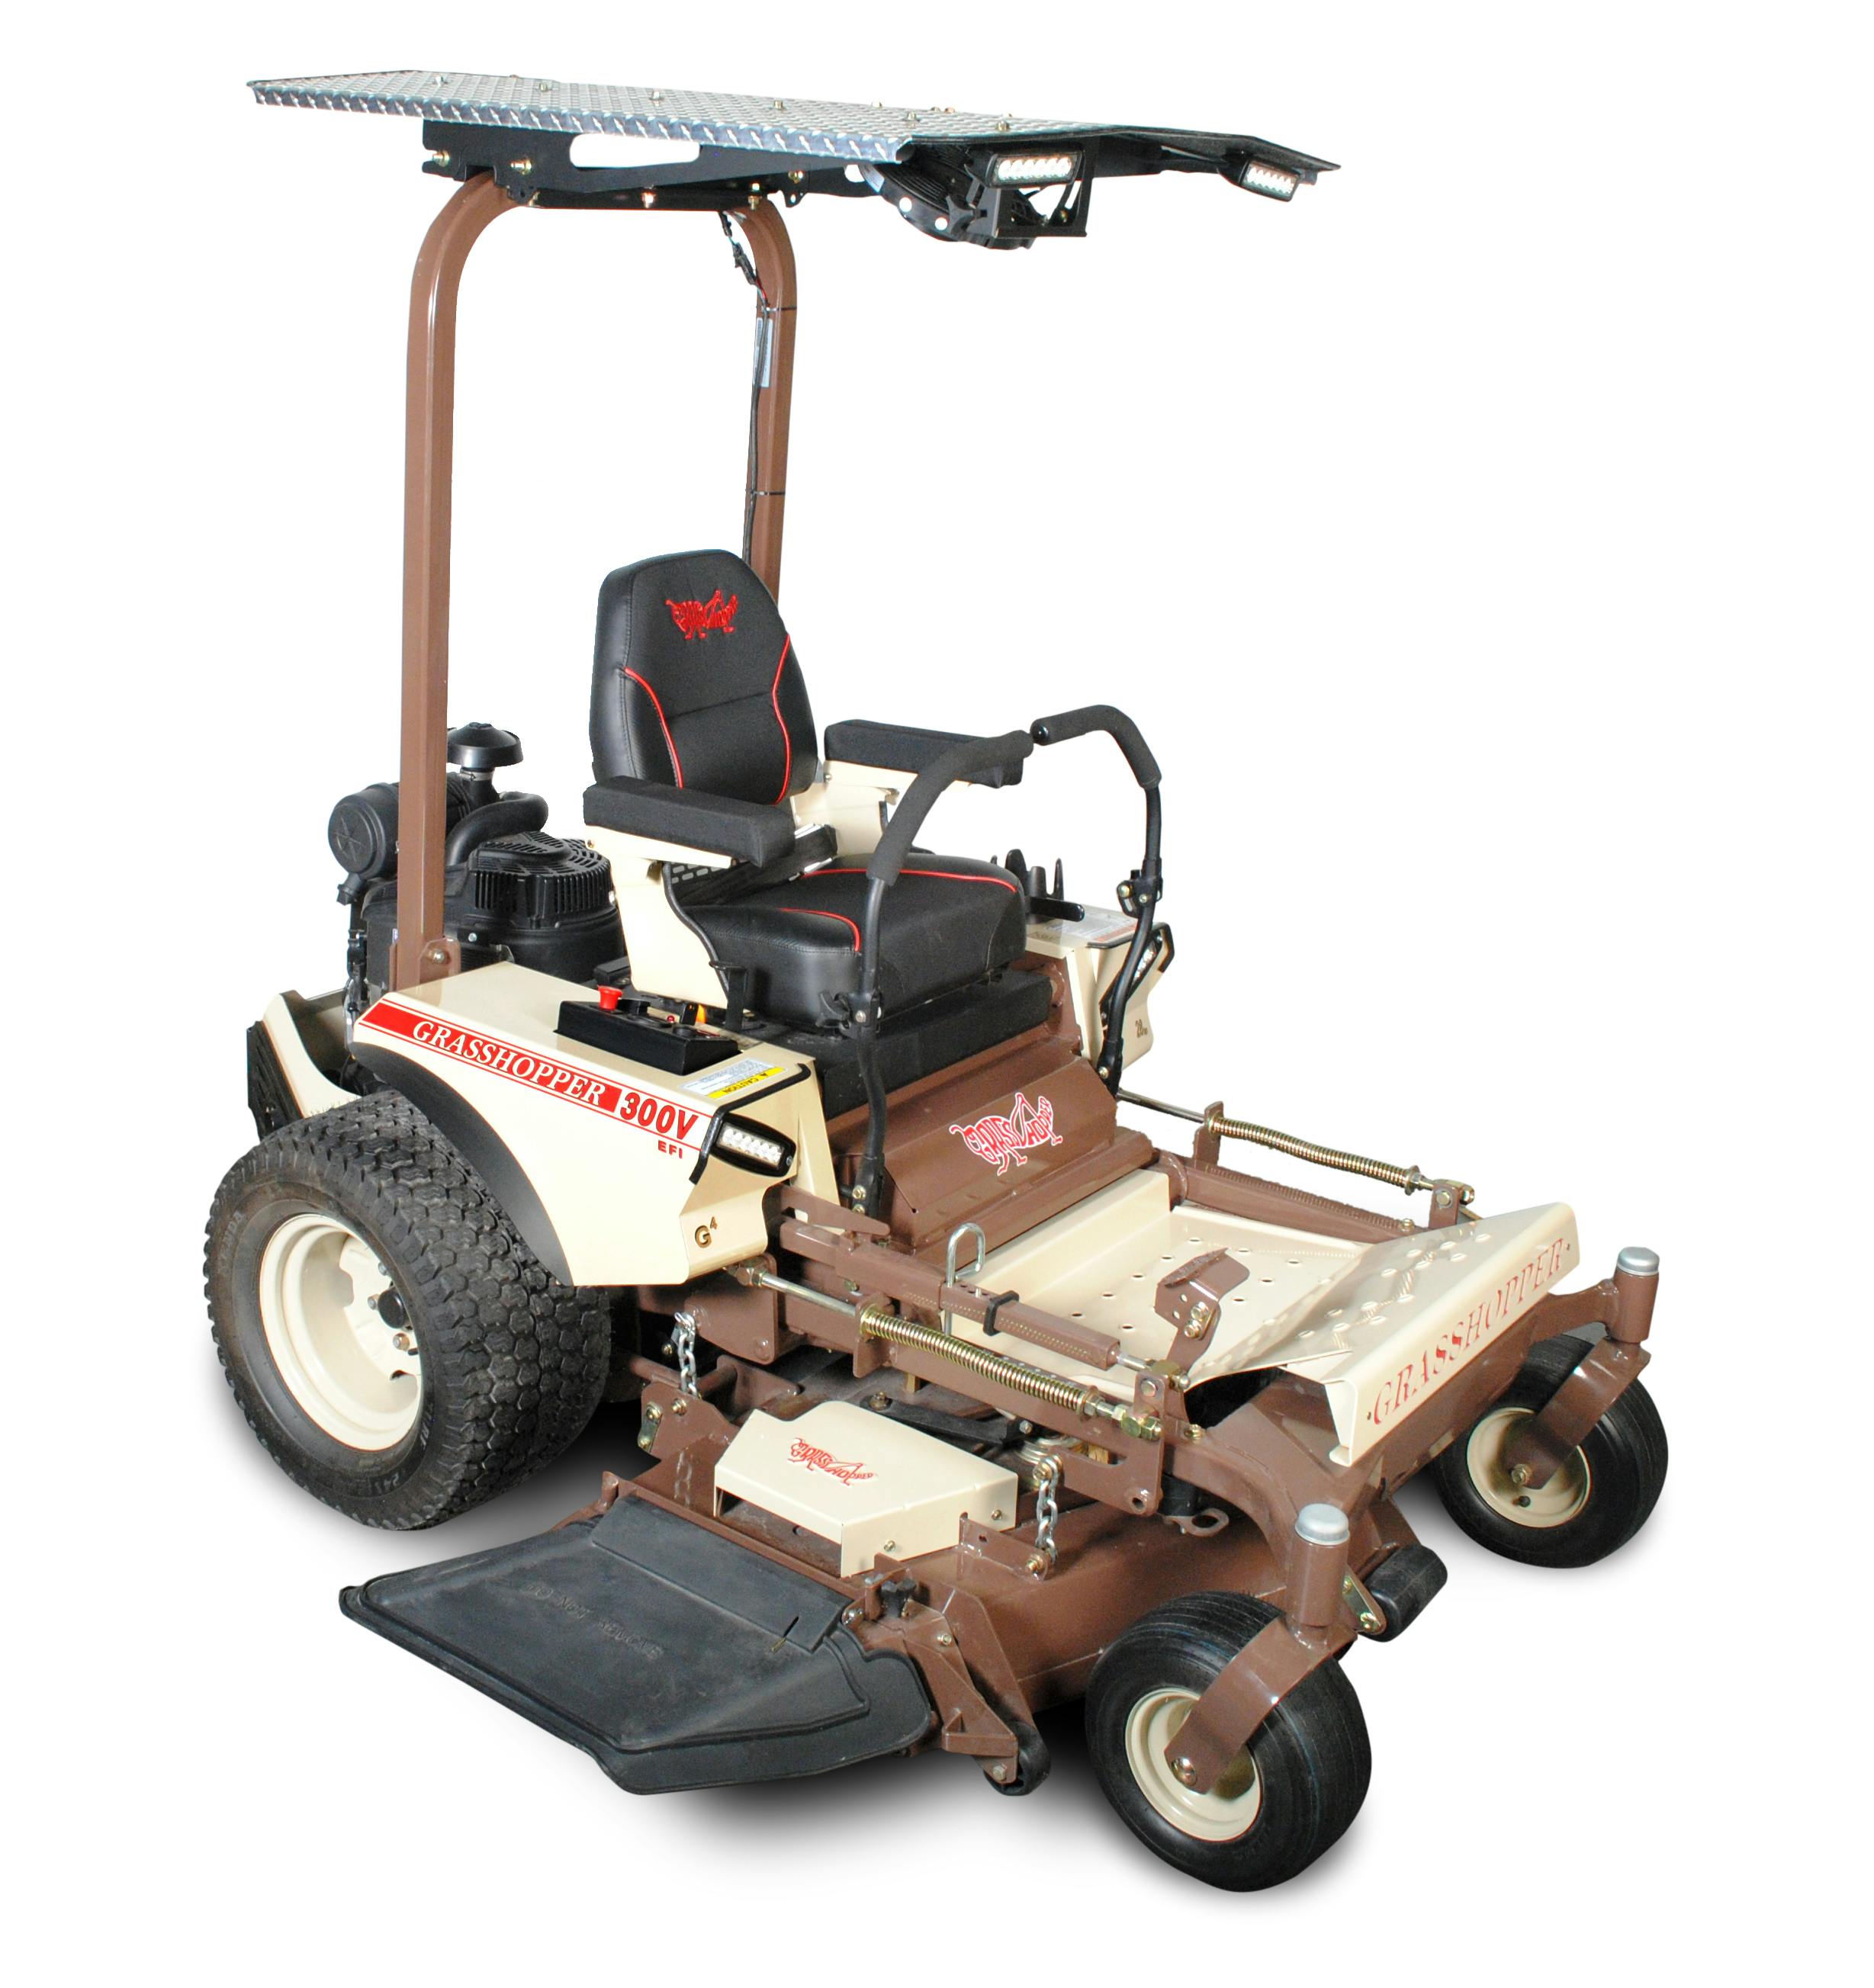 126V Compact ZeroTurn Lawn Mower for Sale in Carthage, TN DT McCall & Sons Carthage